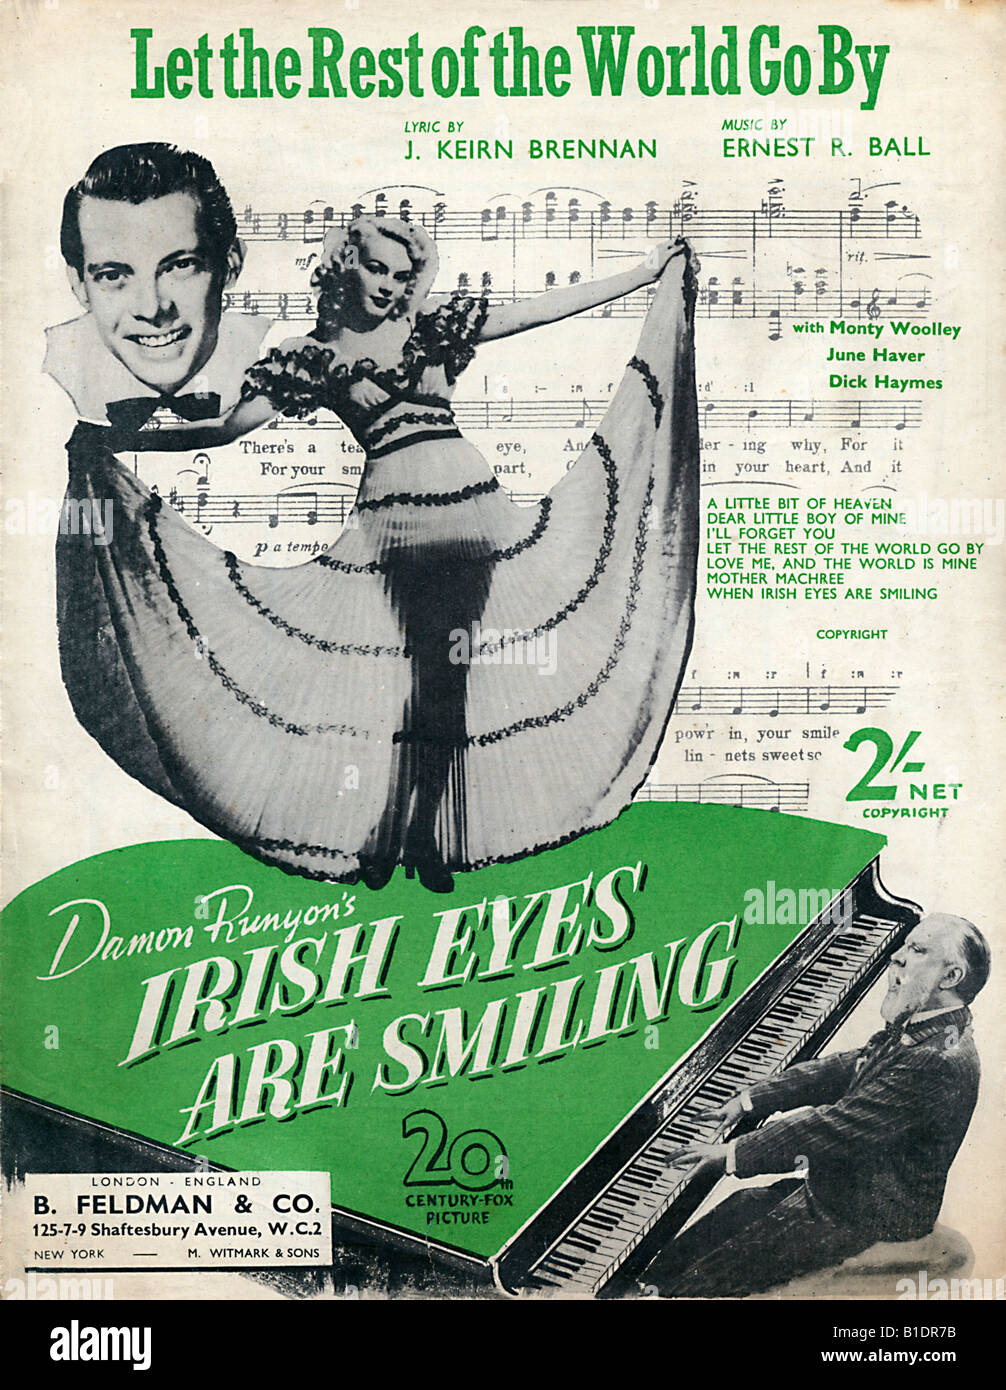 Let The Rest Of The World Go By Music sheet cover for the song from the Damon Runyon movie Irish Eyes Are Smiling Stock Photo